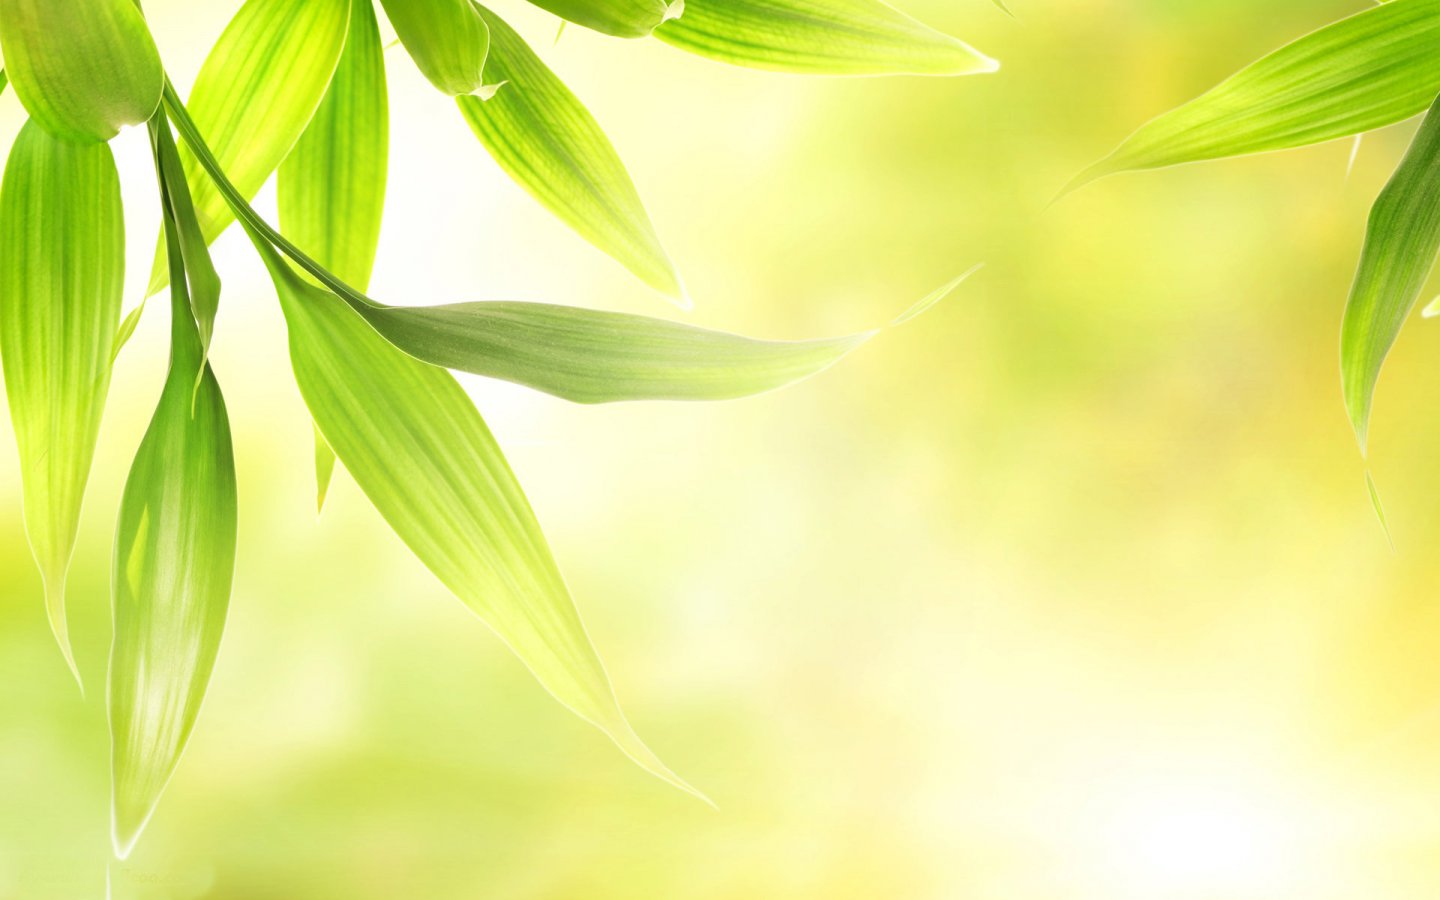 Green Leaves Wallpaper Pictures